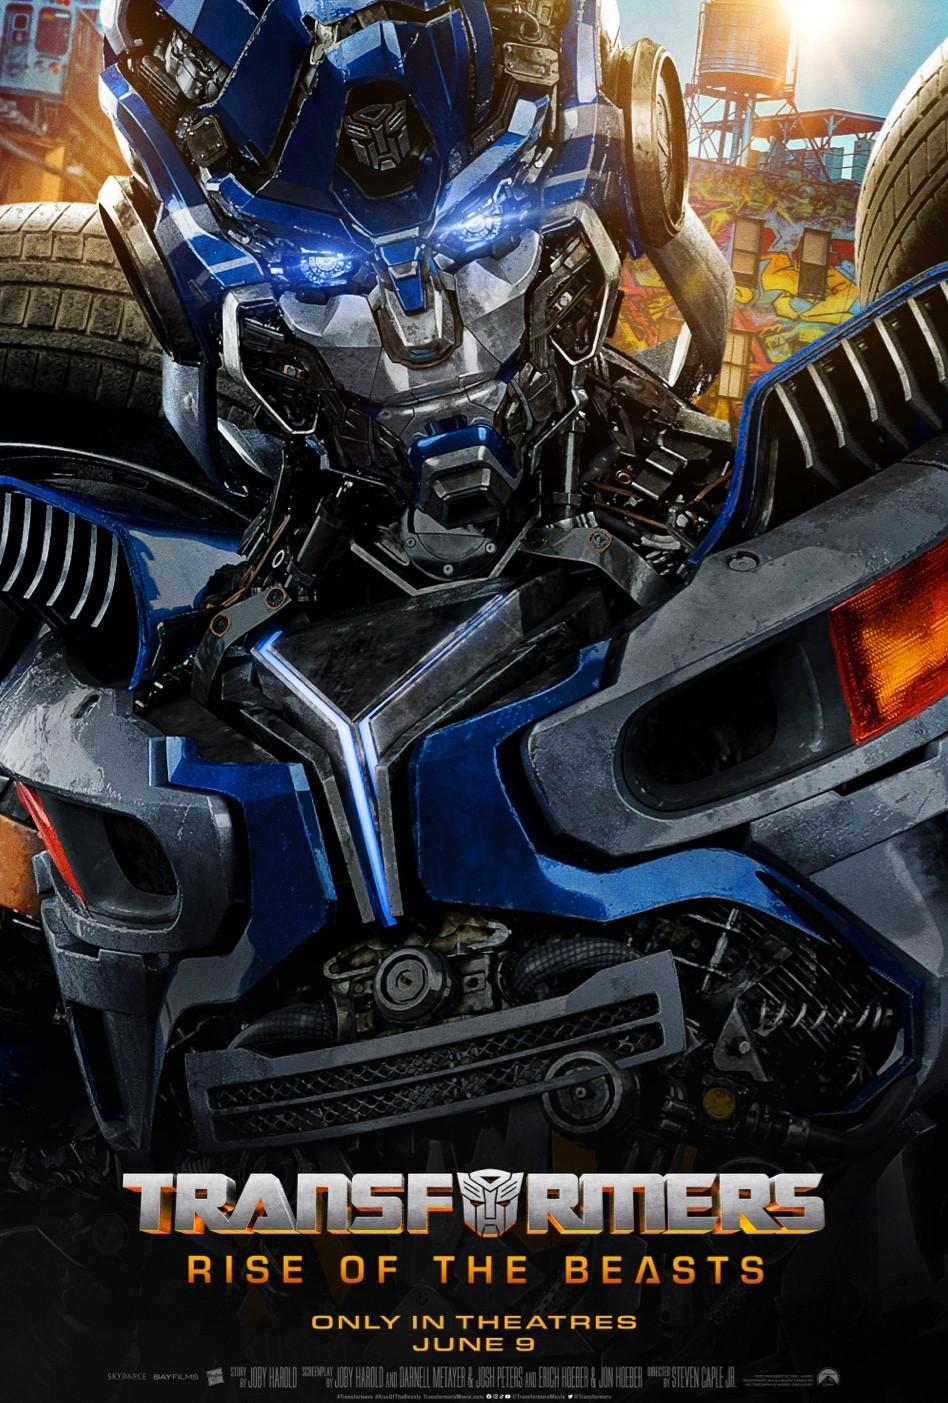 Movie poster for “Transformers: Rise of the Beasts.” (Paramount Pictures)